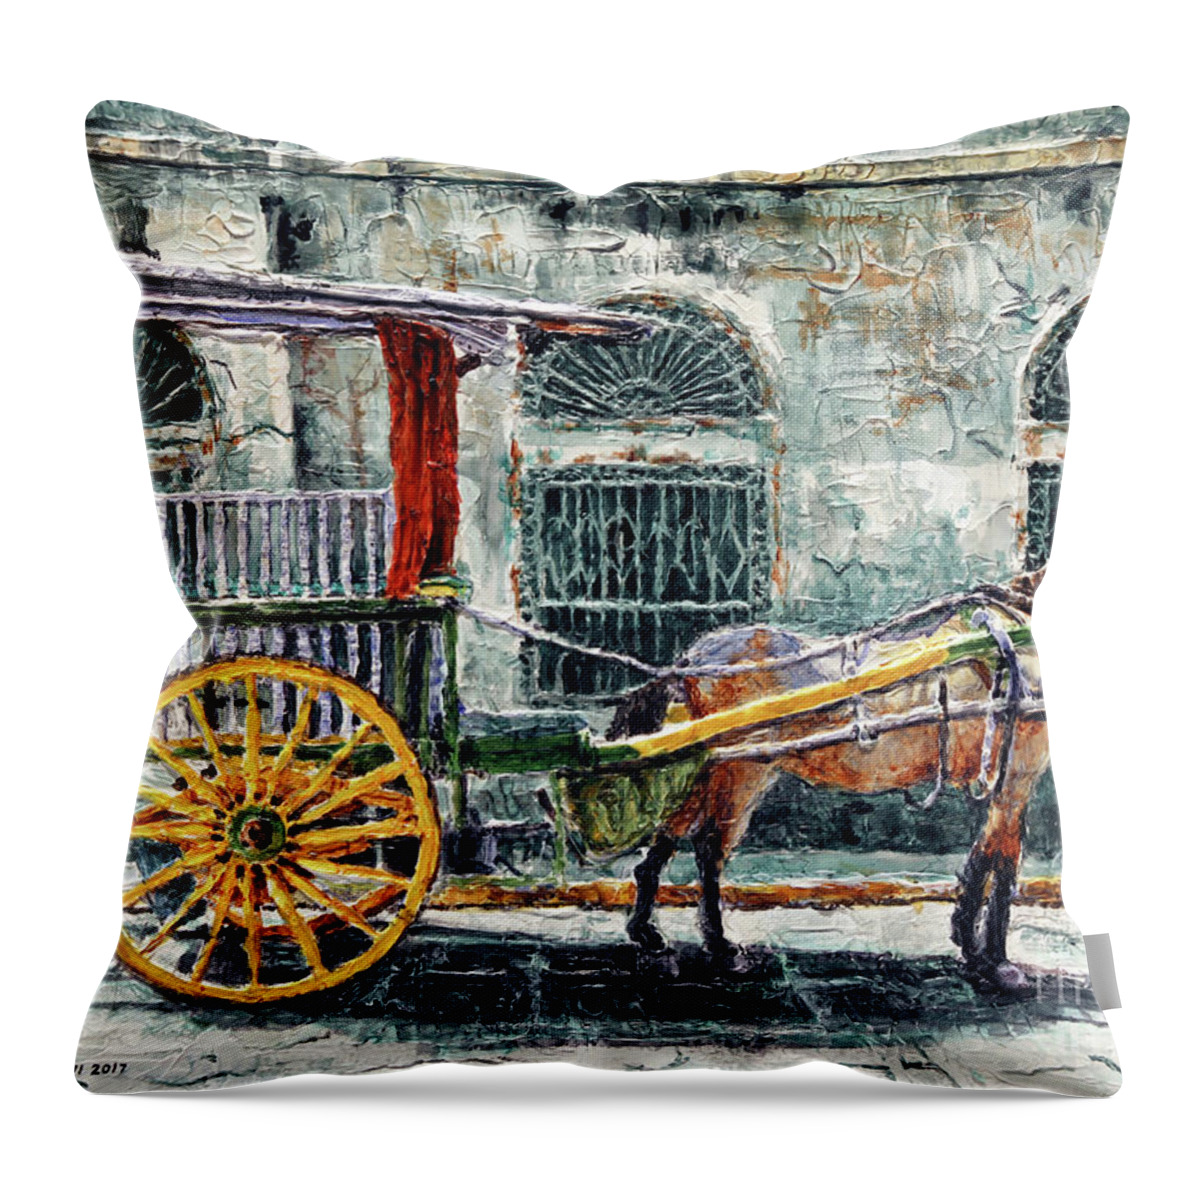 Intramuros Throw Pillow featuring the painting A Carriage in Intramuros, Manila by Joey Agbayani